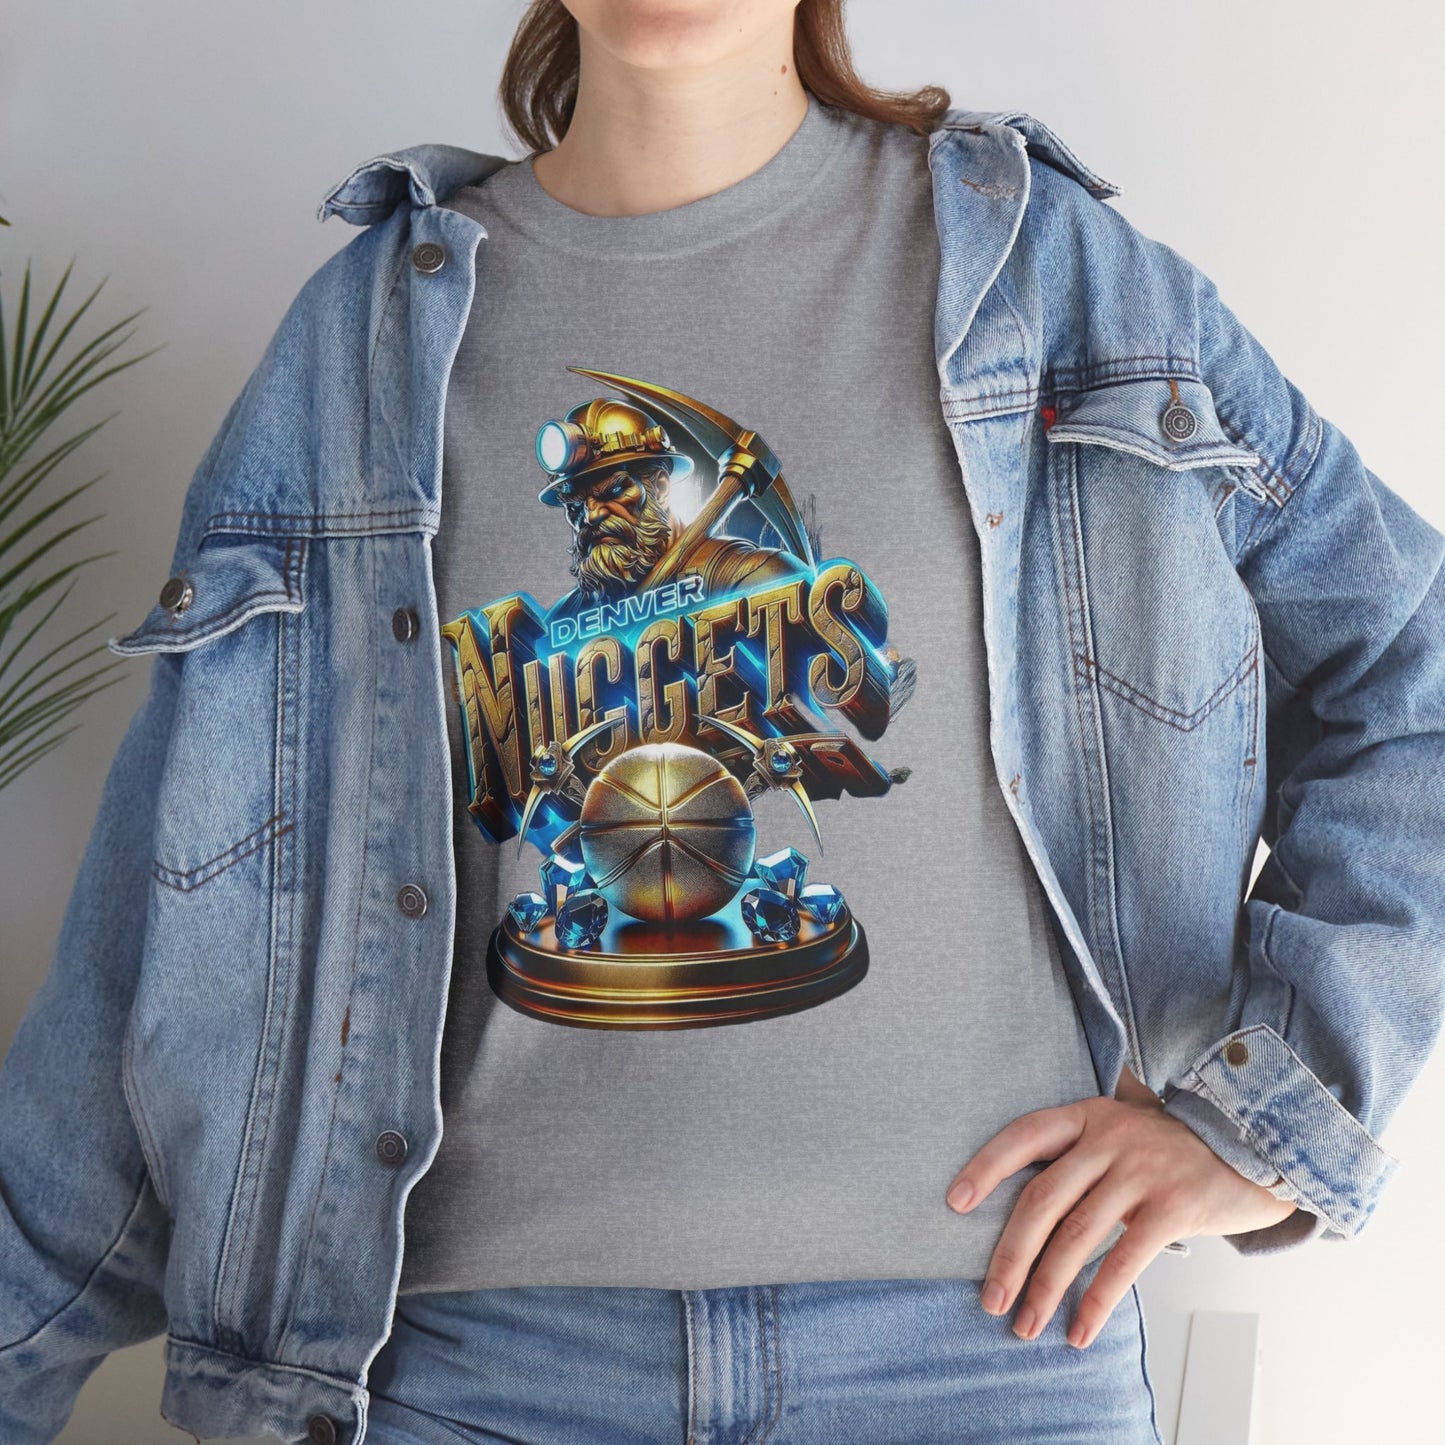 New Denver Nuggets High Quality Printed Unisex Heavy Cotton T-shirt